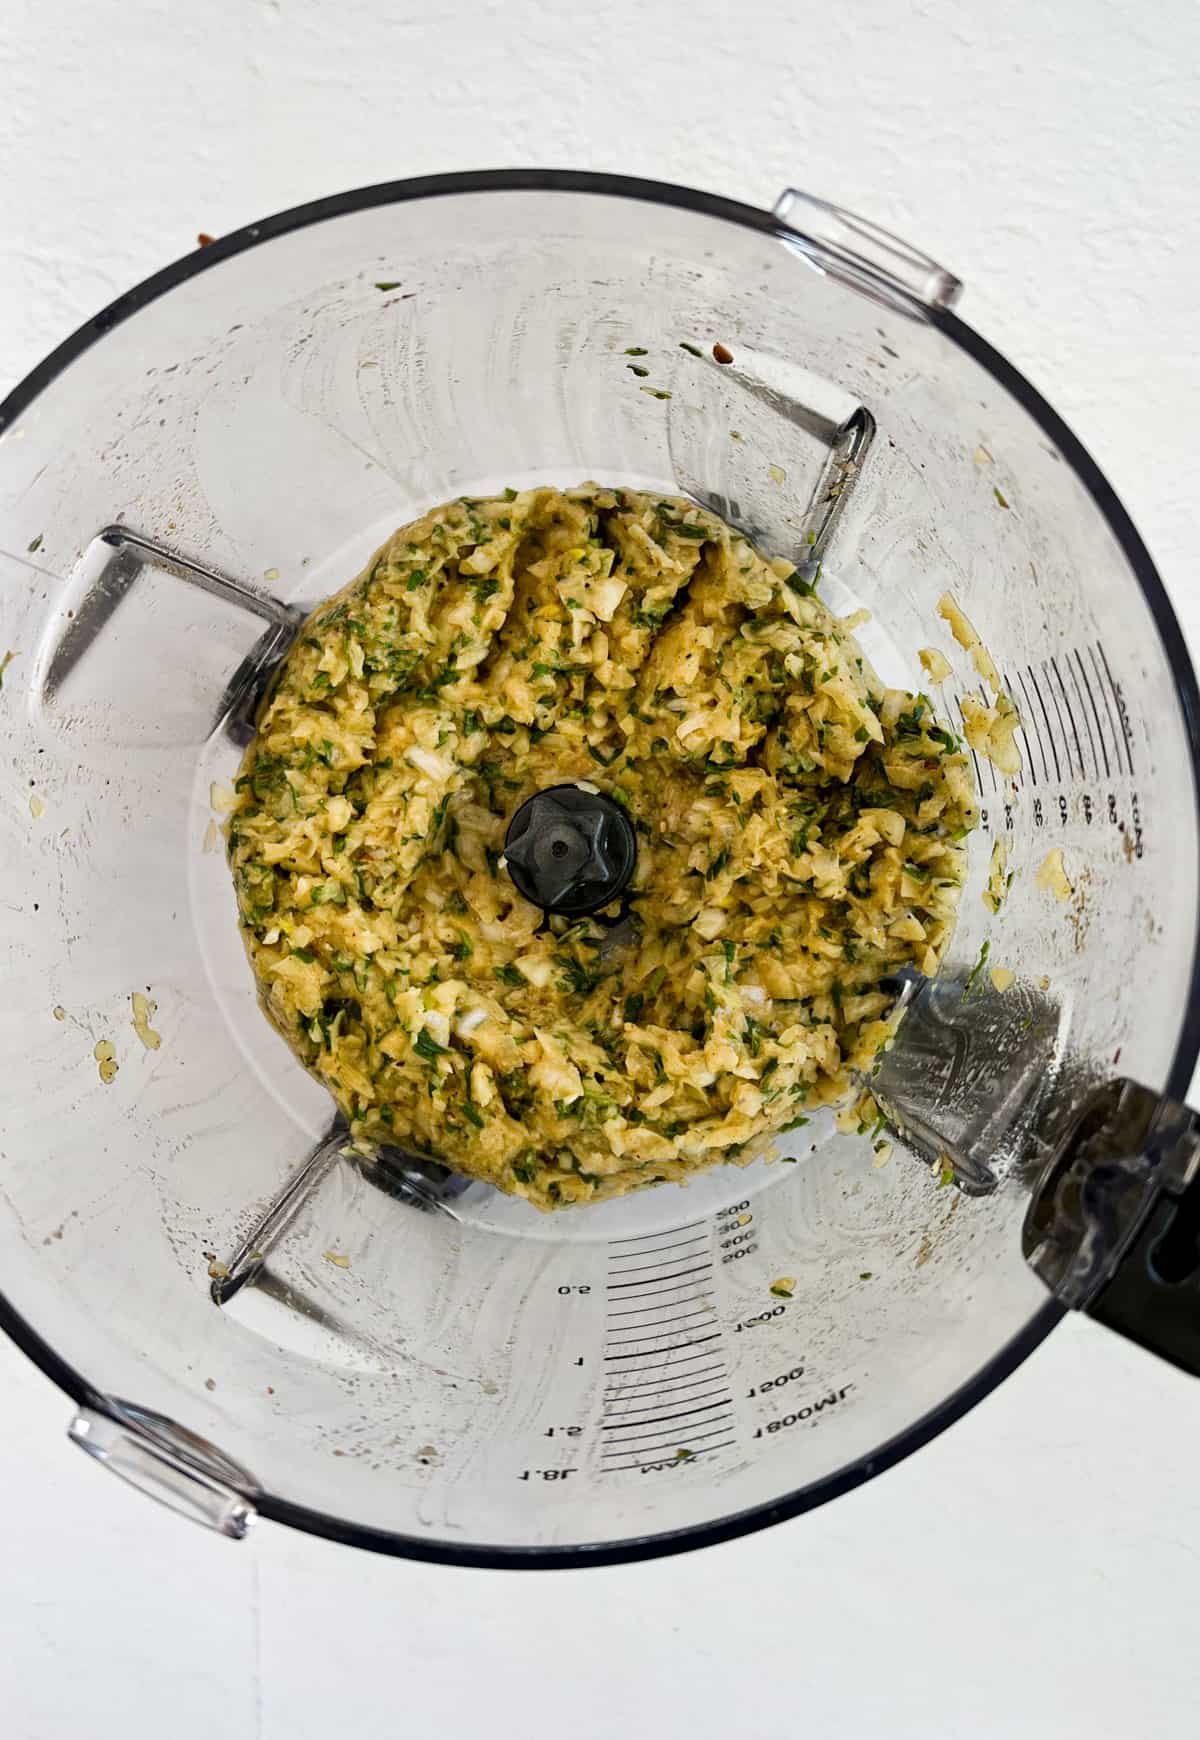 blended onion and herbs in a food processor bowl